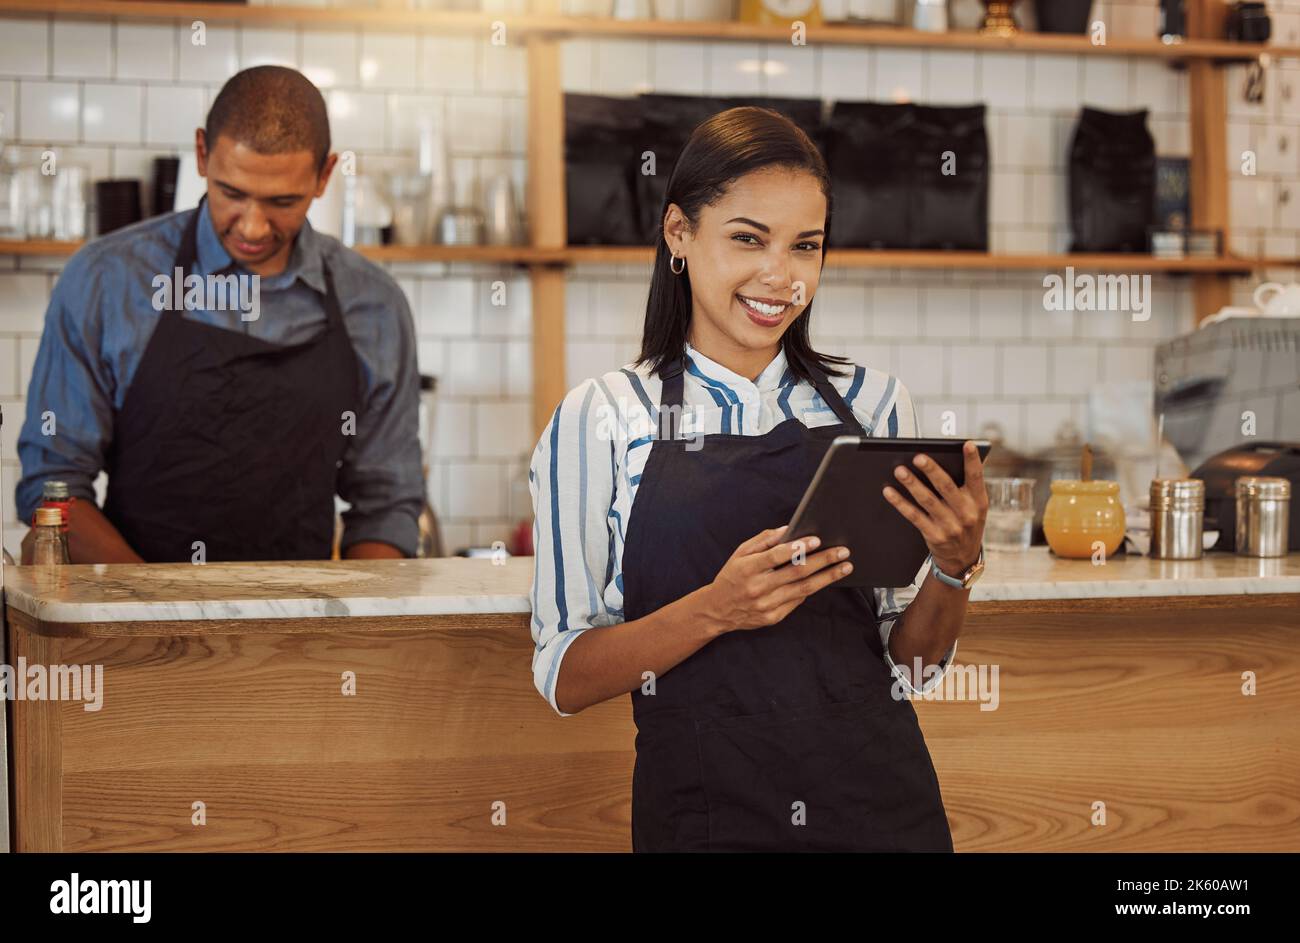 Portrait of a businesswoman ordering stock on her digital tablet. Business partners working together in restaurant kitchen. Entrepreneur using a Stock Photo